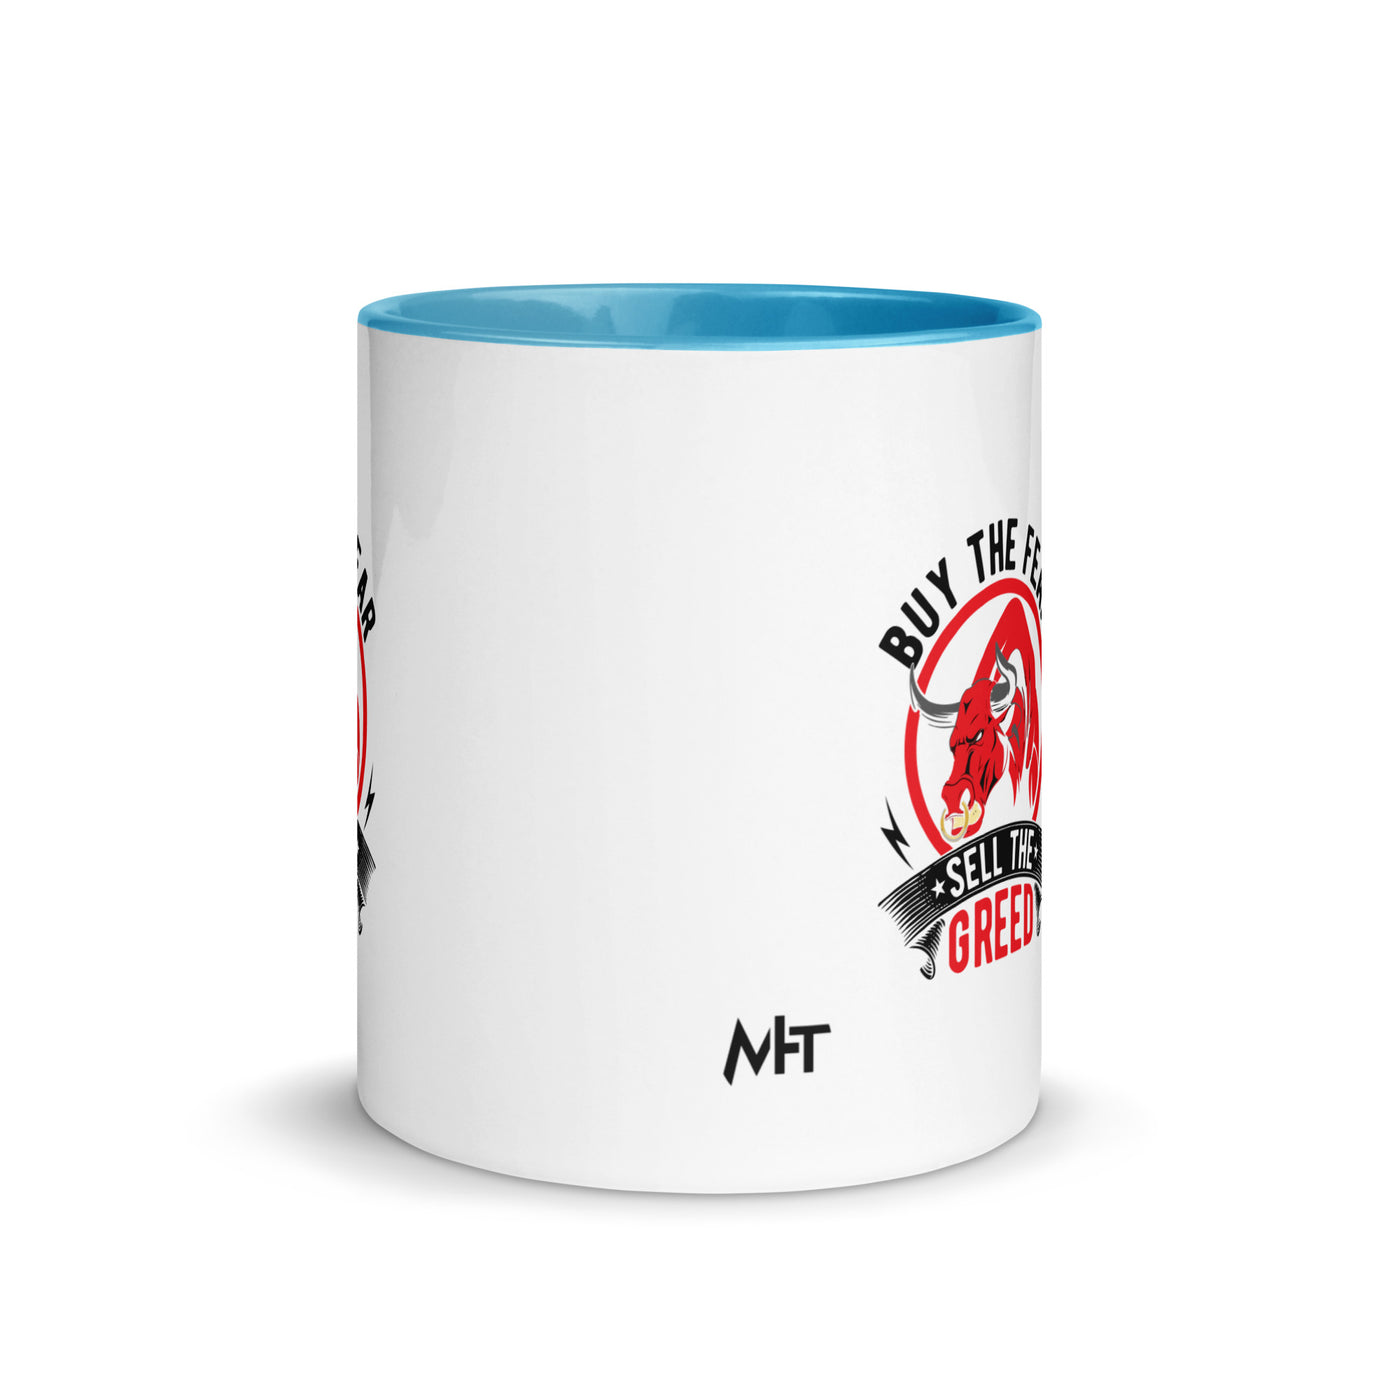 Buy the Fear; Sell the Greed in Dark Text - Mug with Color Inside